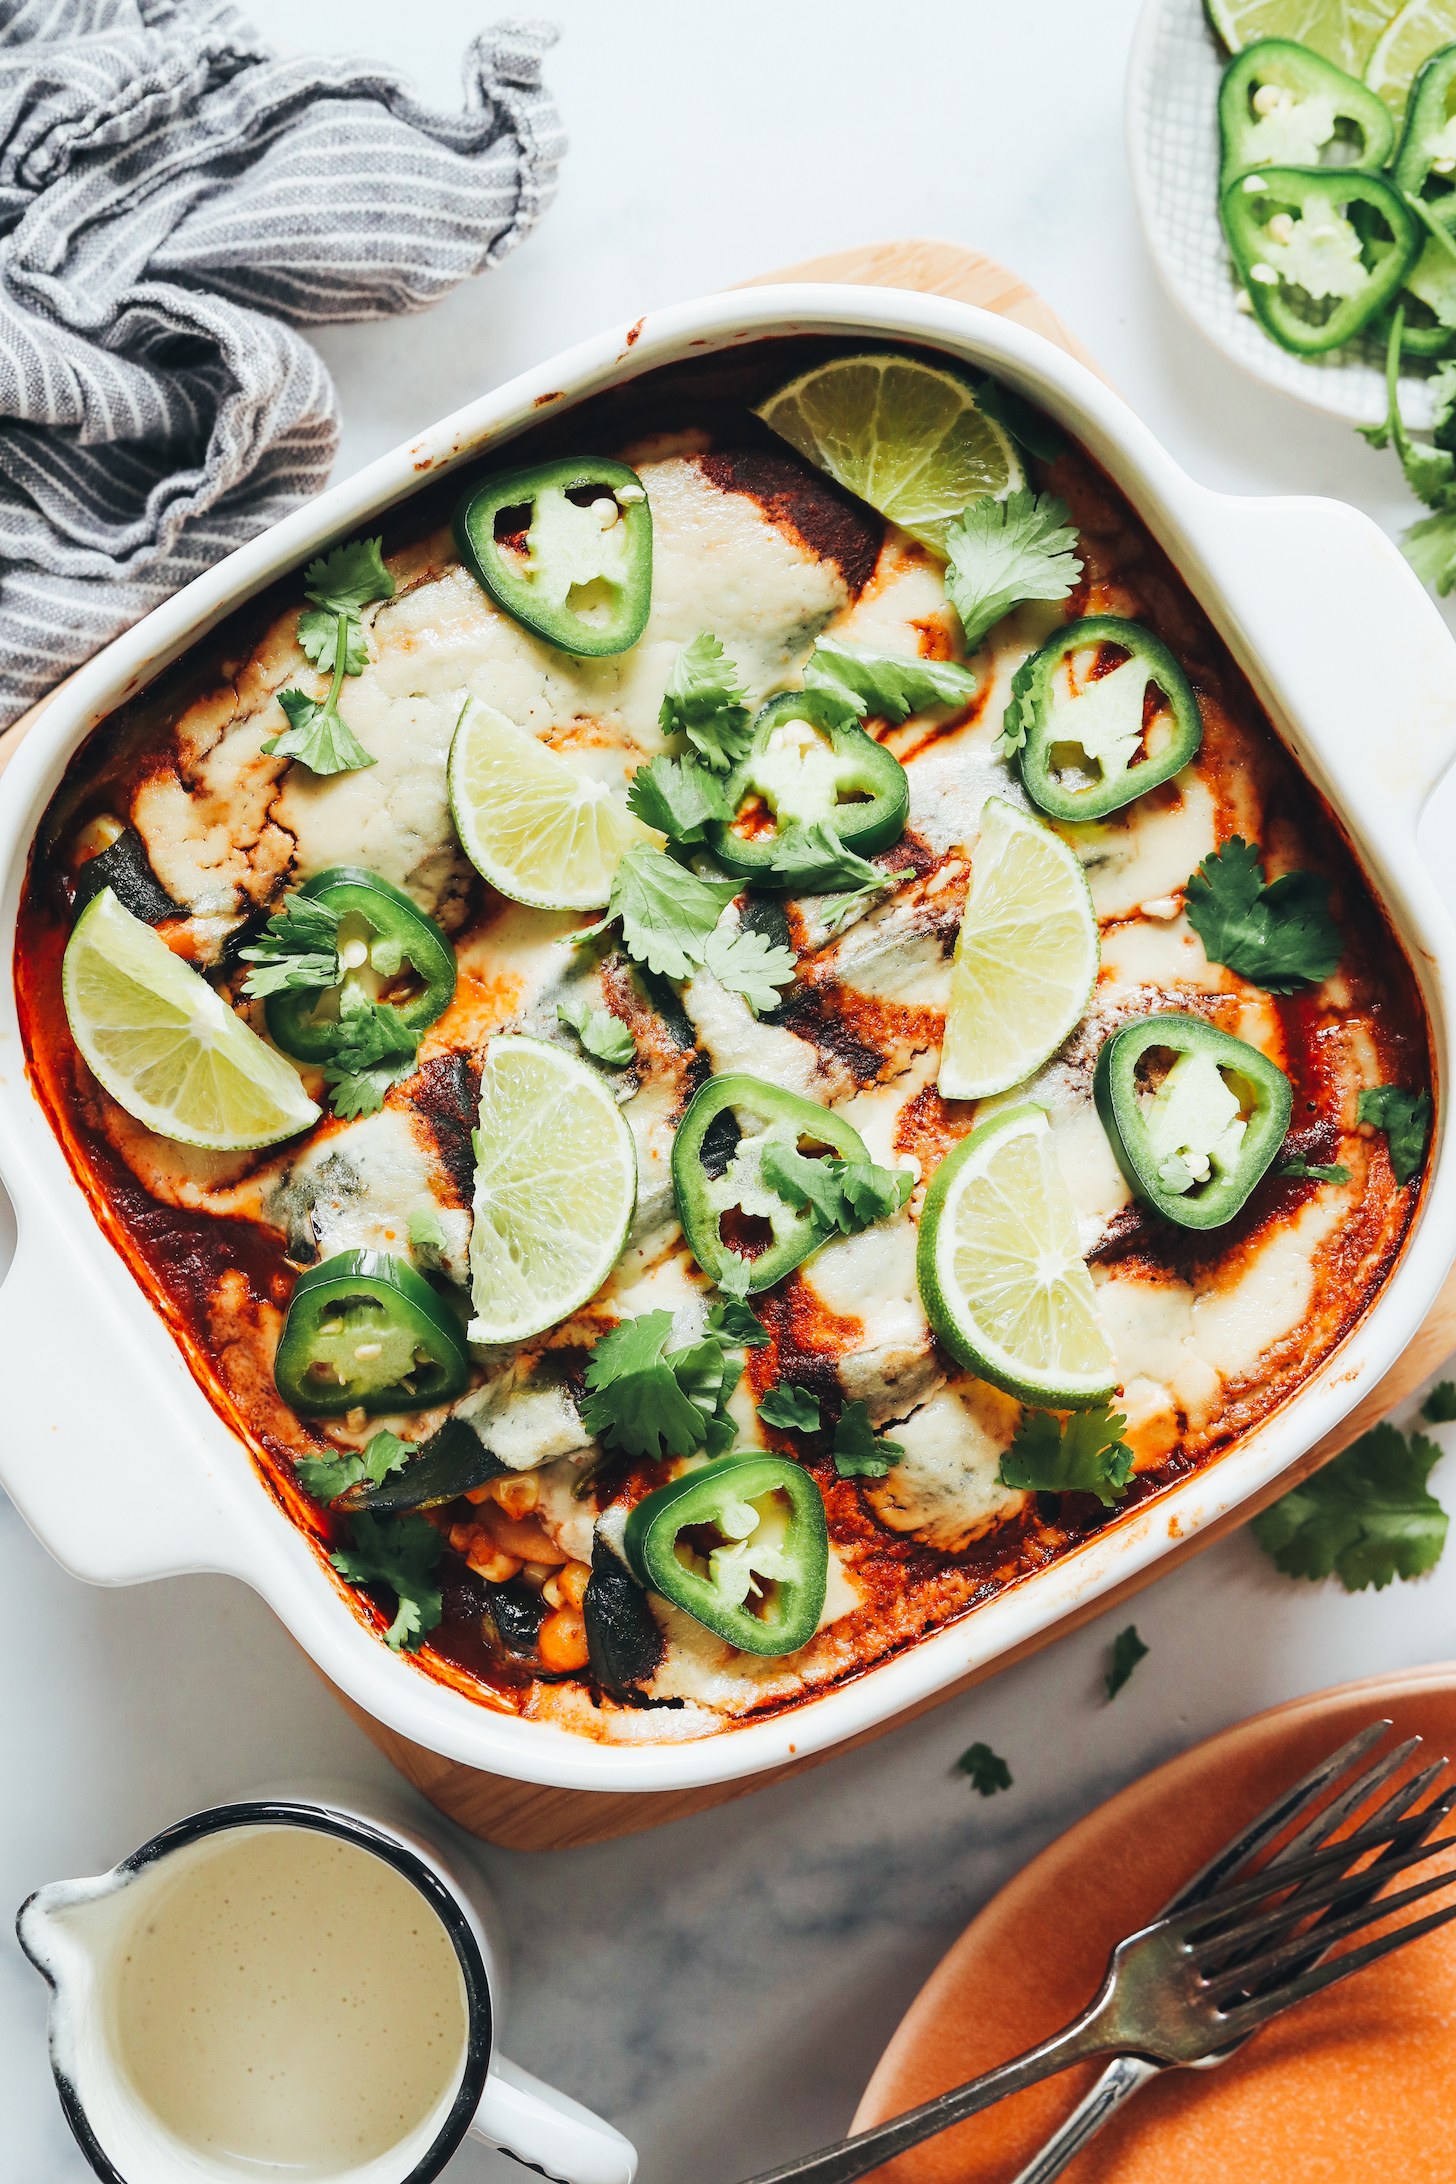 Baked vegan chile relleno in a pan topped with jalapeño, cilantro, and limes